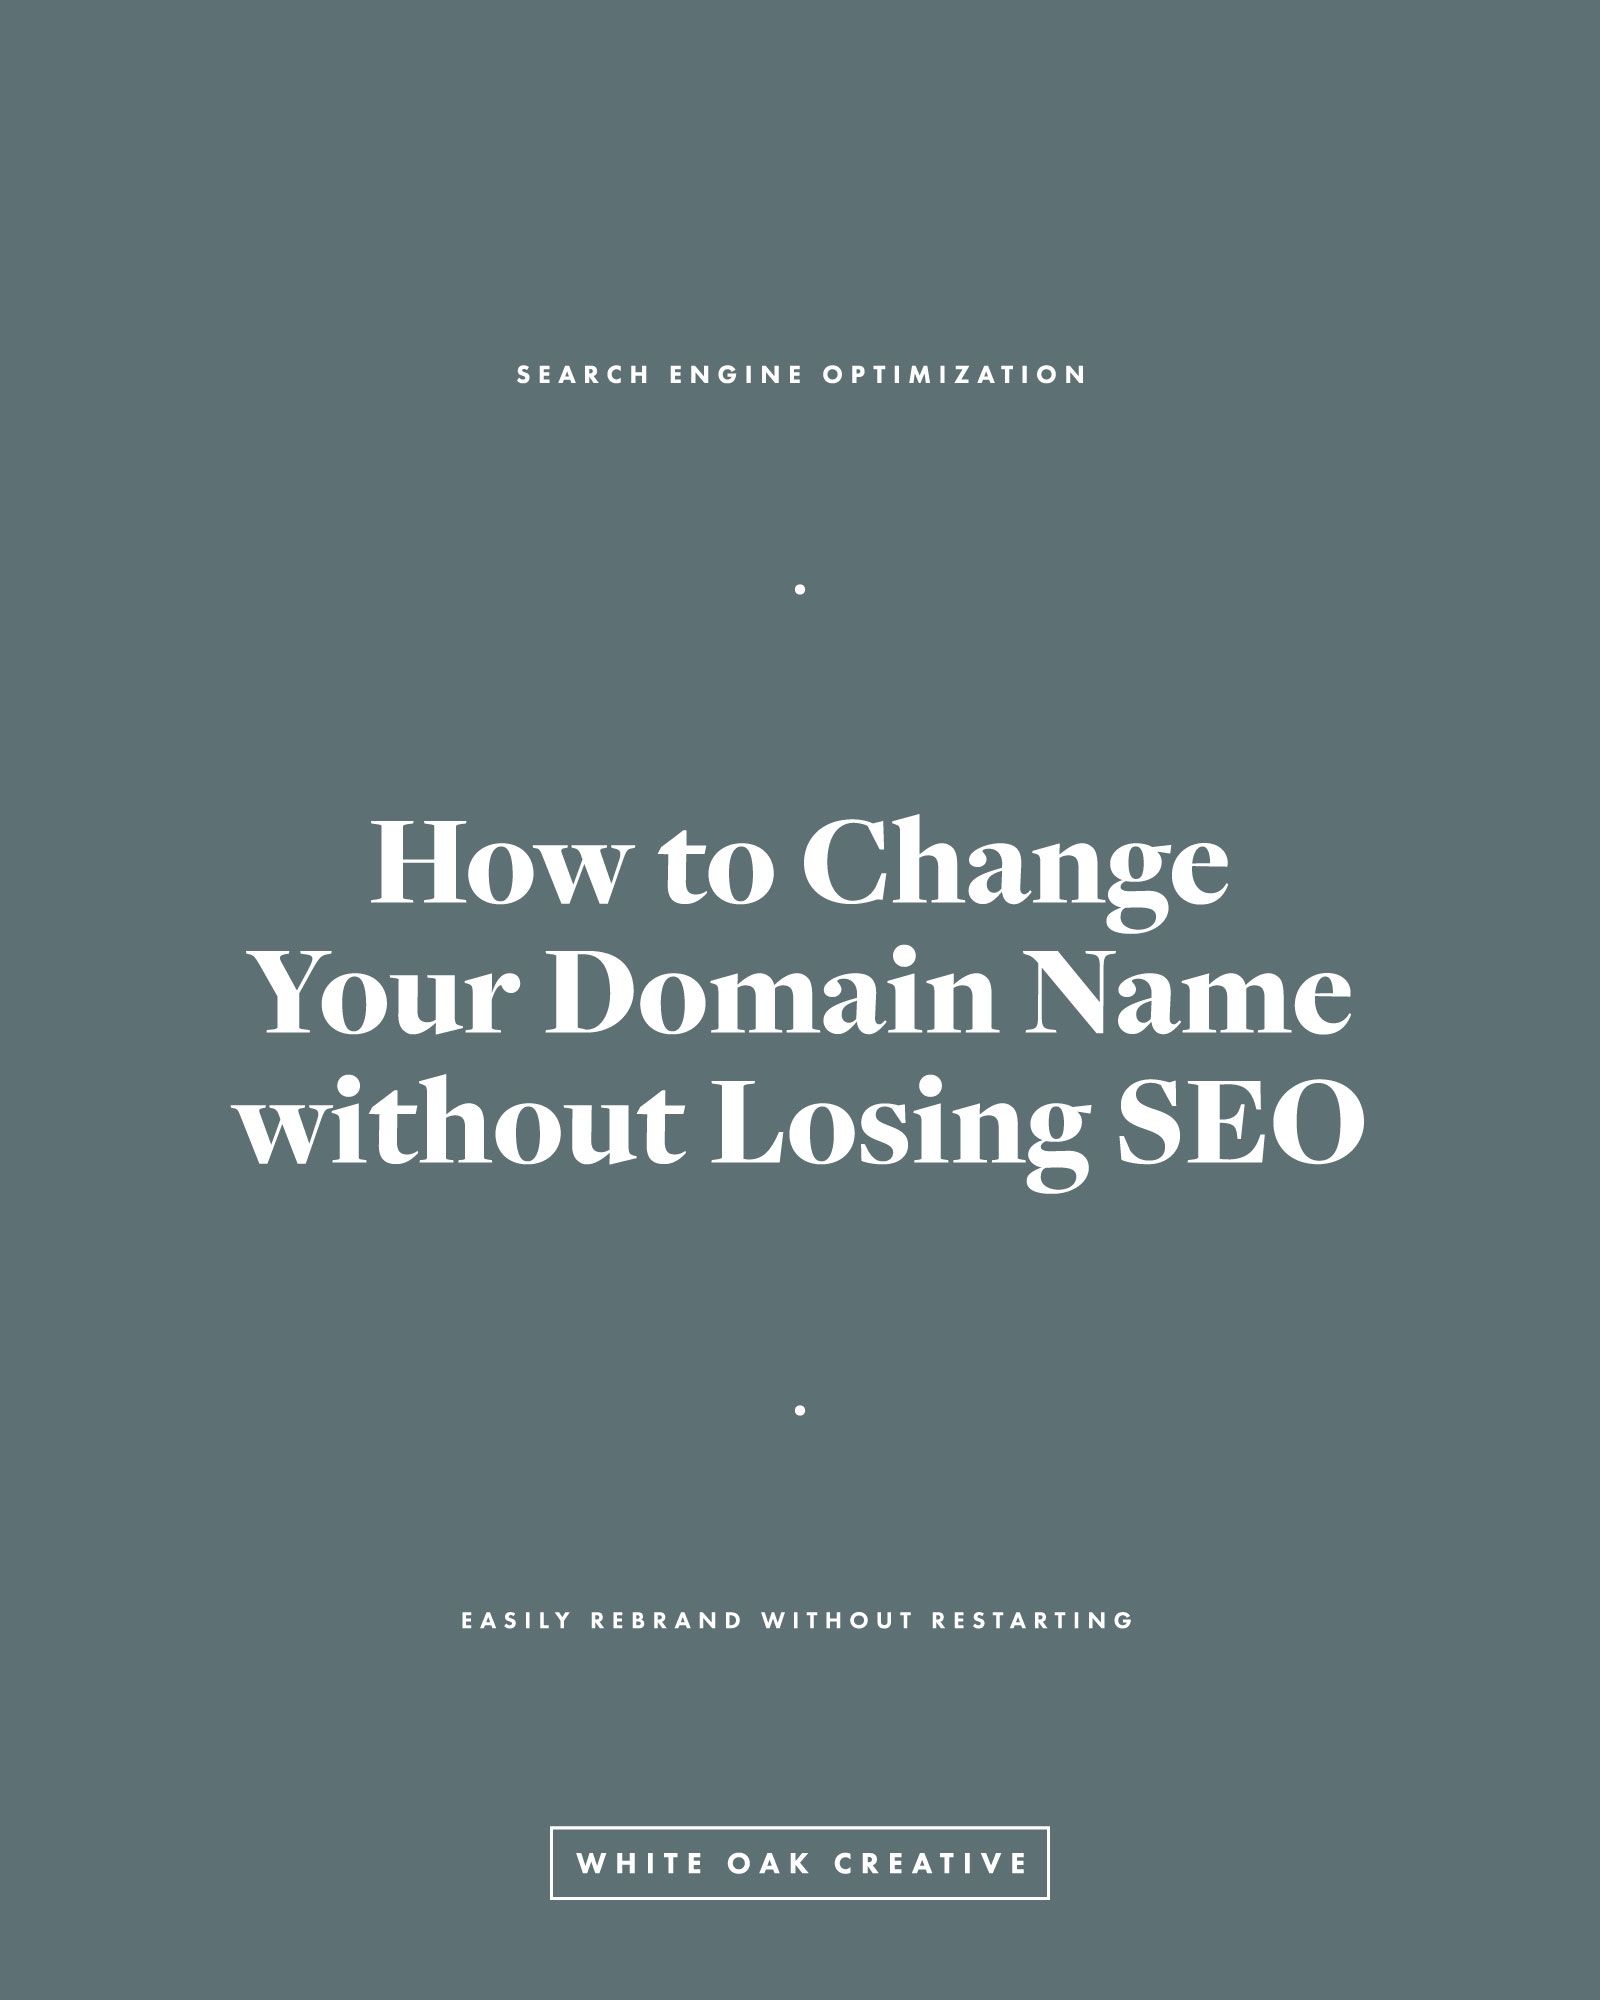 Change Your Domain Name Without Losing SEO